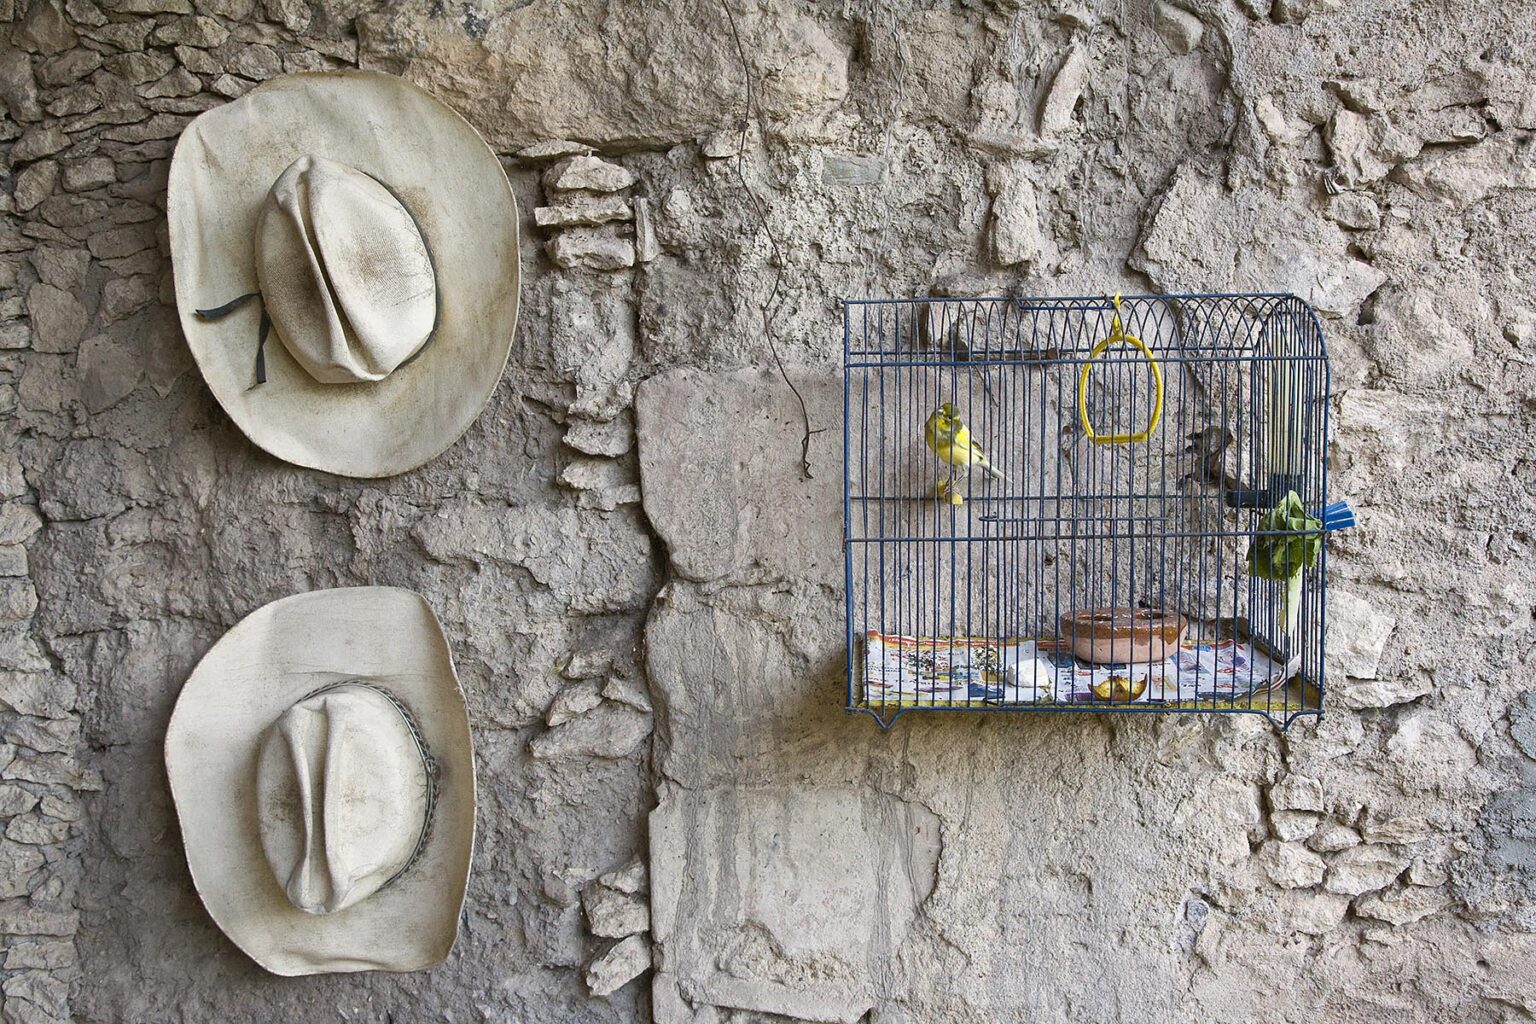 COWBOY HATS and BIRD CAGE in the ghost town of MINERAL DE POZOS - GUANAJUATO, MEXICO